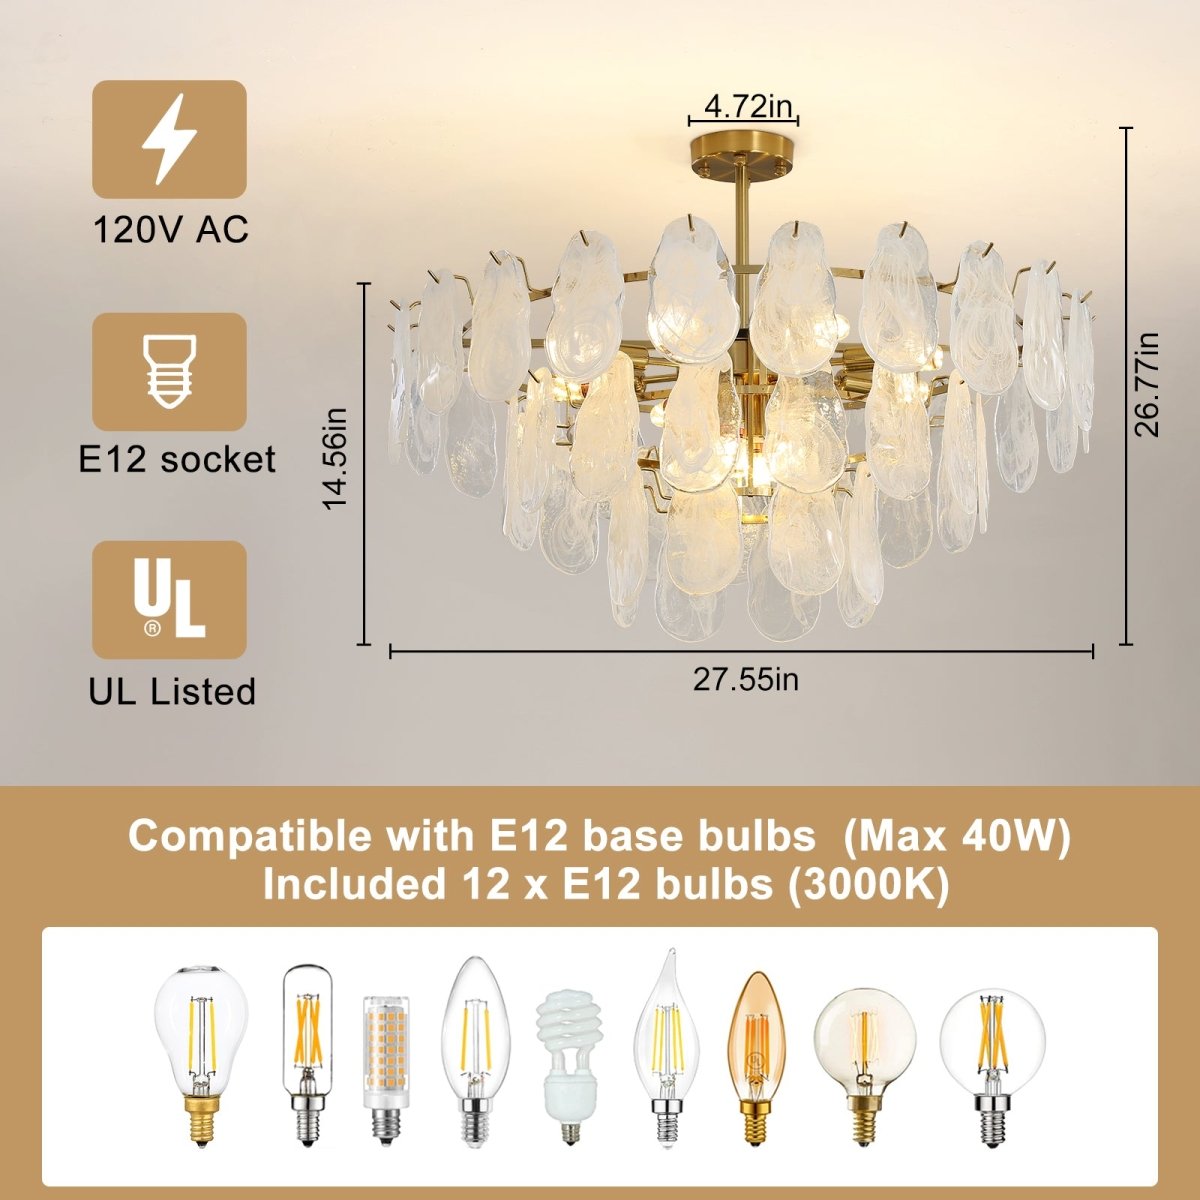 Wansi Shine 12-Light Modern Semi Flush Mount Ceiling Light, 31.5" or 27.5" Crystal Chandelier Ceiling Light Fixtures with 3-Tire Cloud Glass Lampshade for Bedroom, Included 12 LED Bulbs - WS-FPC53-D700-12C3 9 | DEPULEY